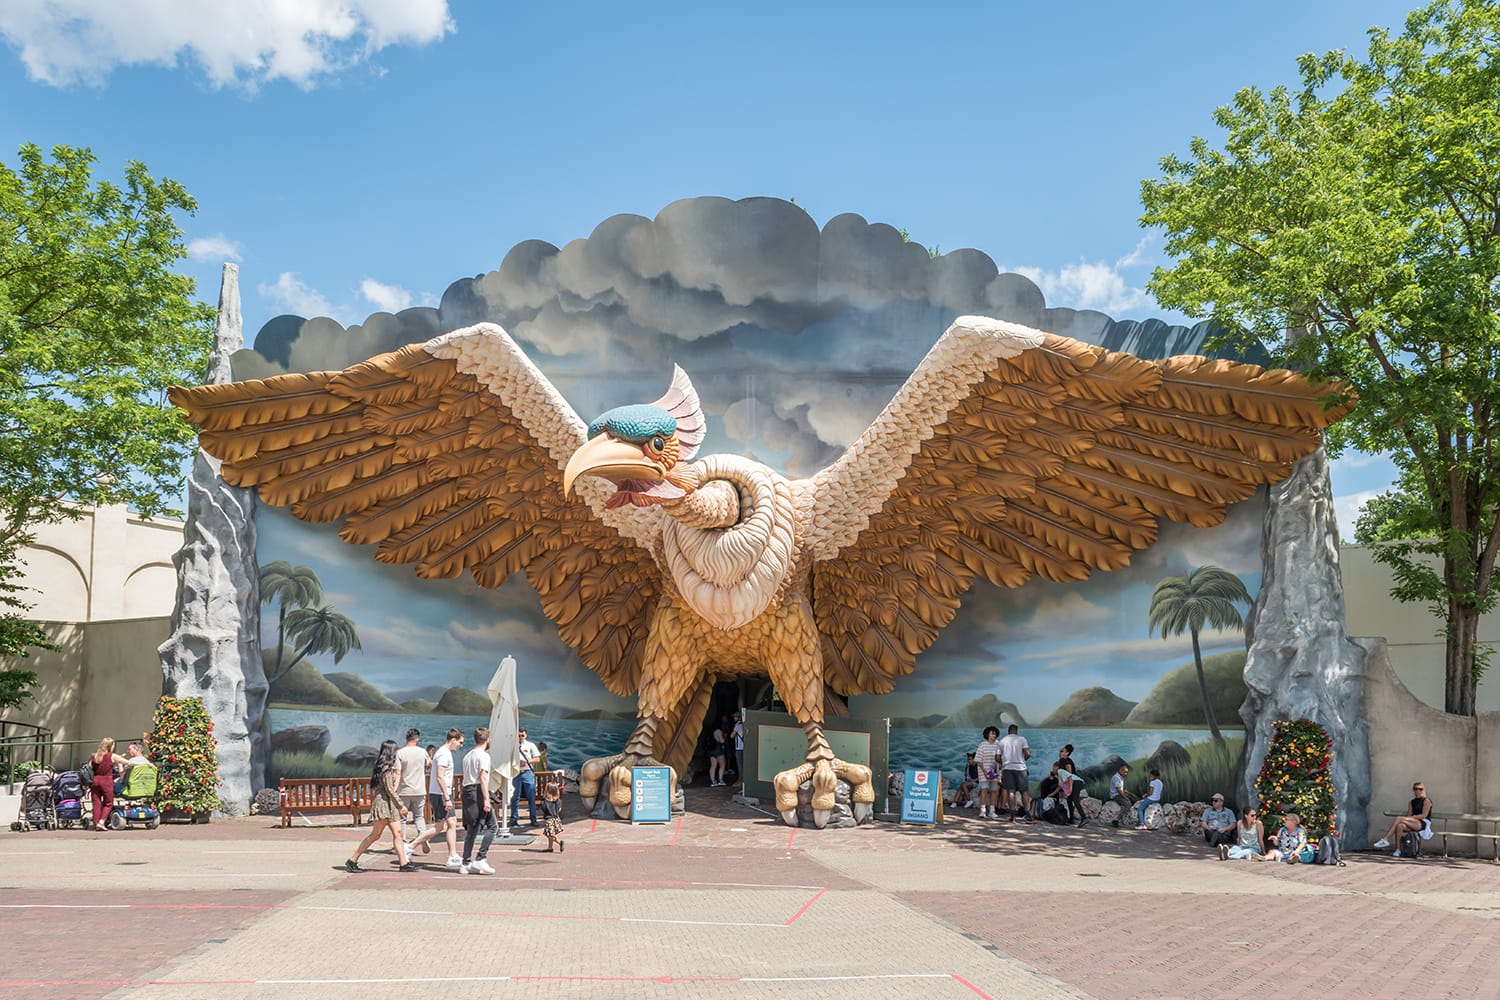 Efteling is the most famous amusement park in the Netherlands and it attracts visitors from all ages. It has fairy tales themes, but also thrilling rides.